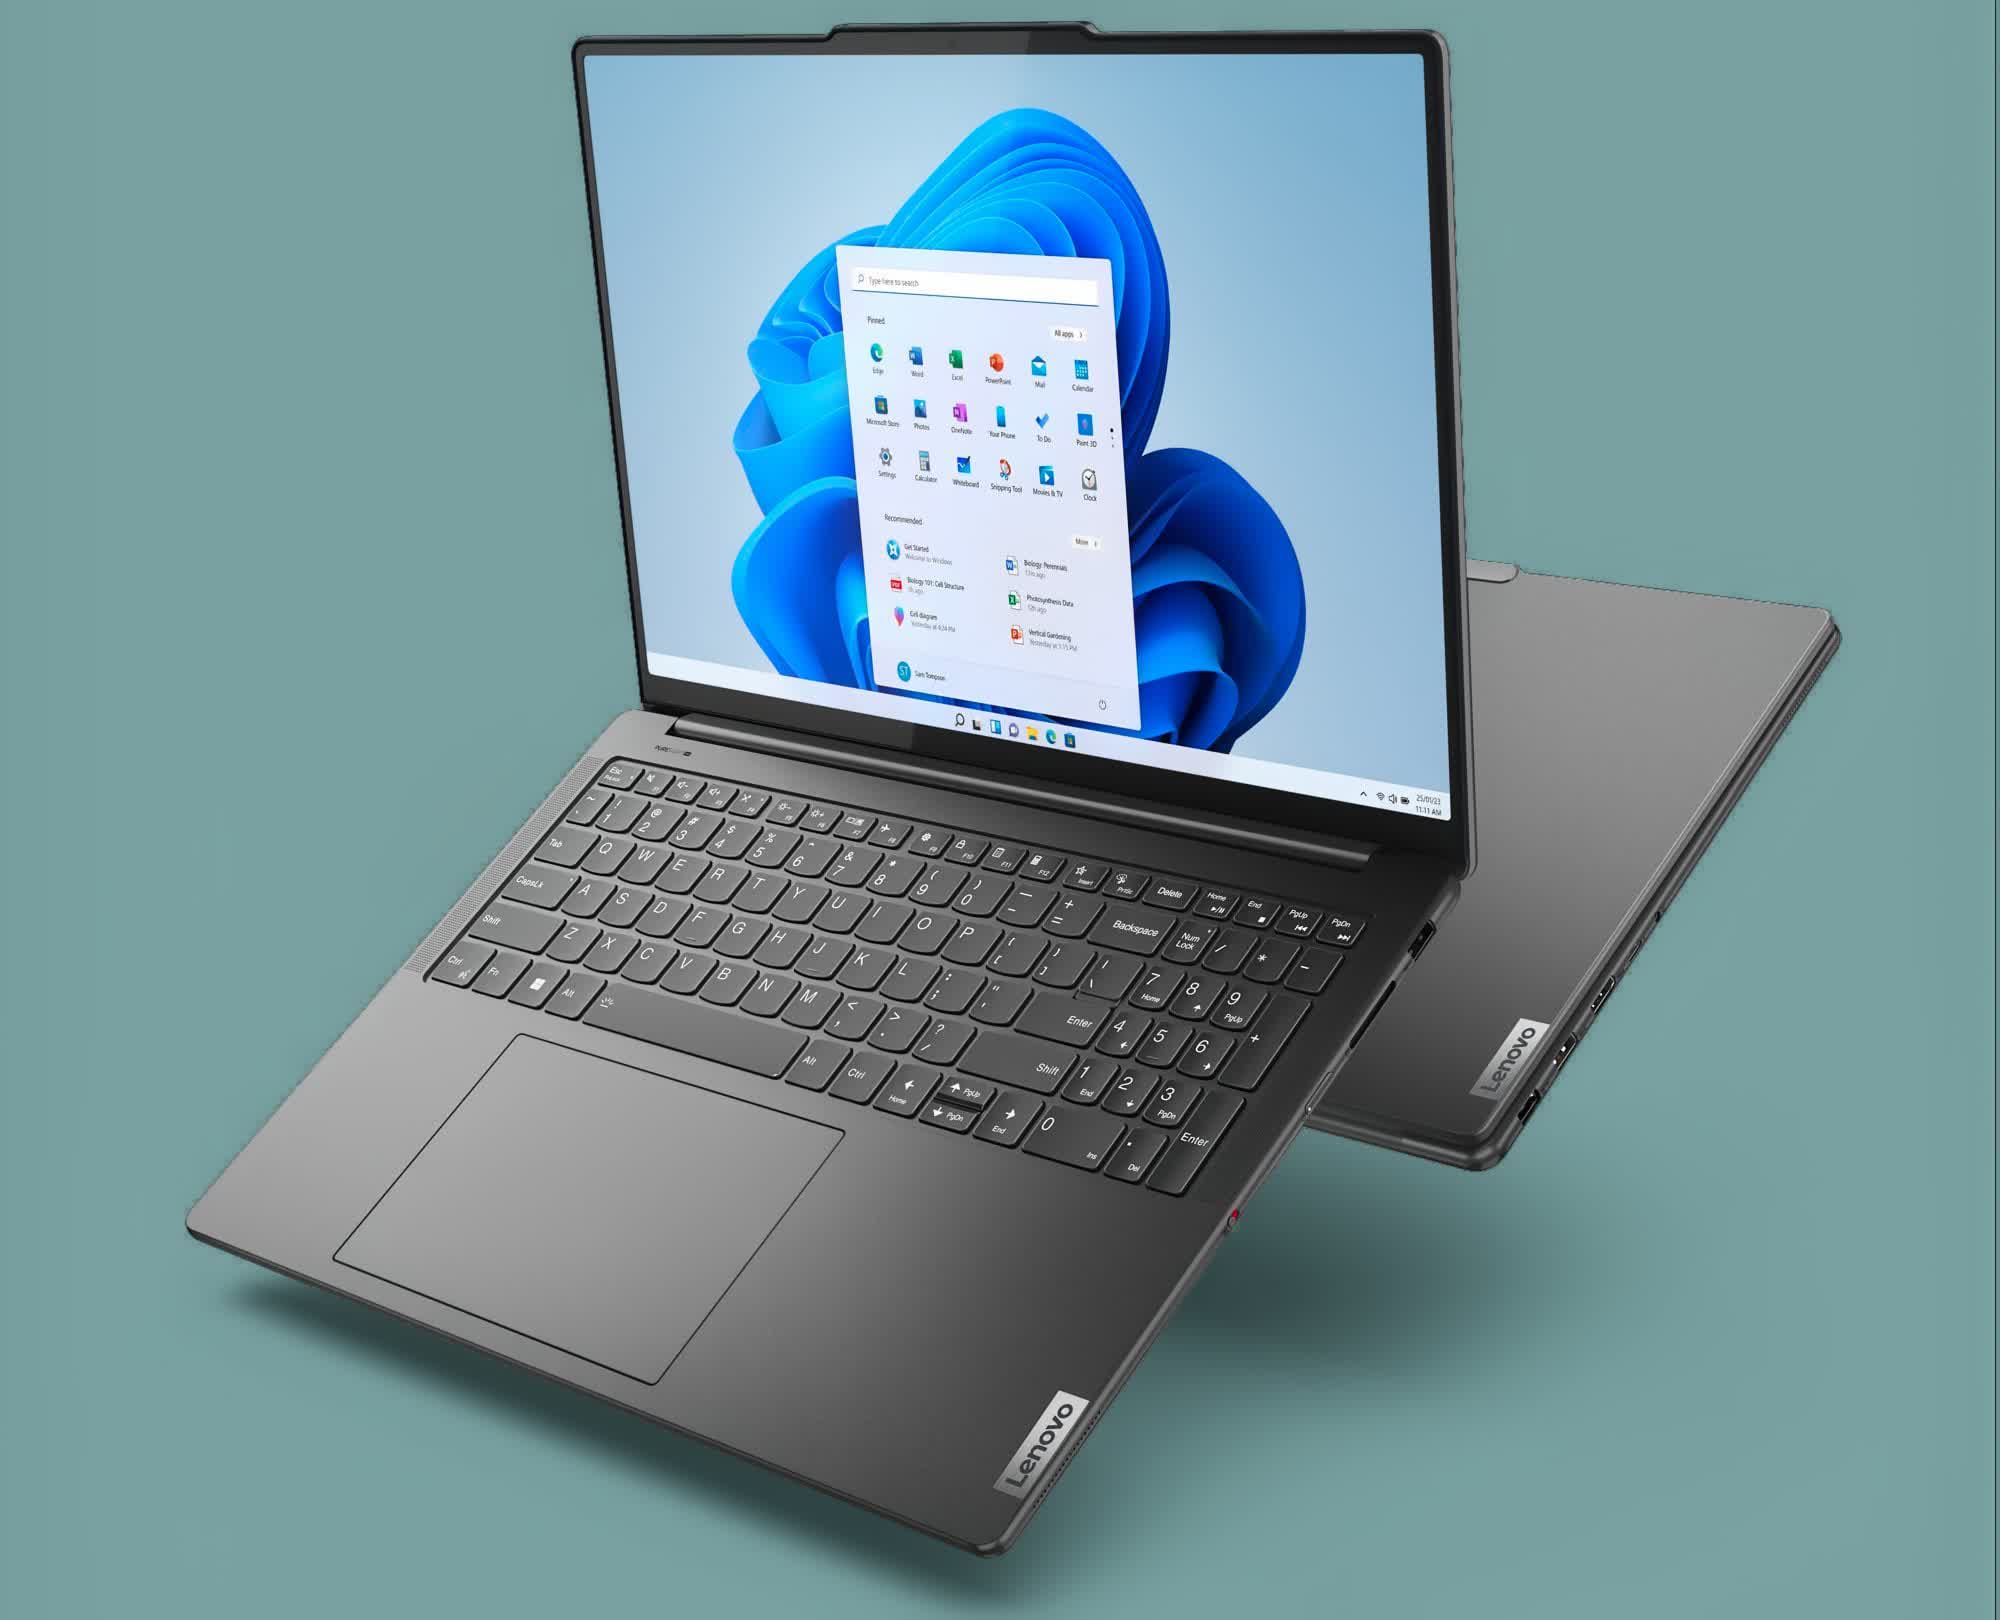 Lenovo launches new Slim Pro and Yoga laptops for creative professionals